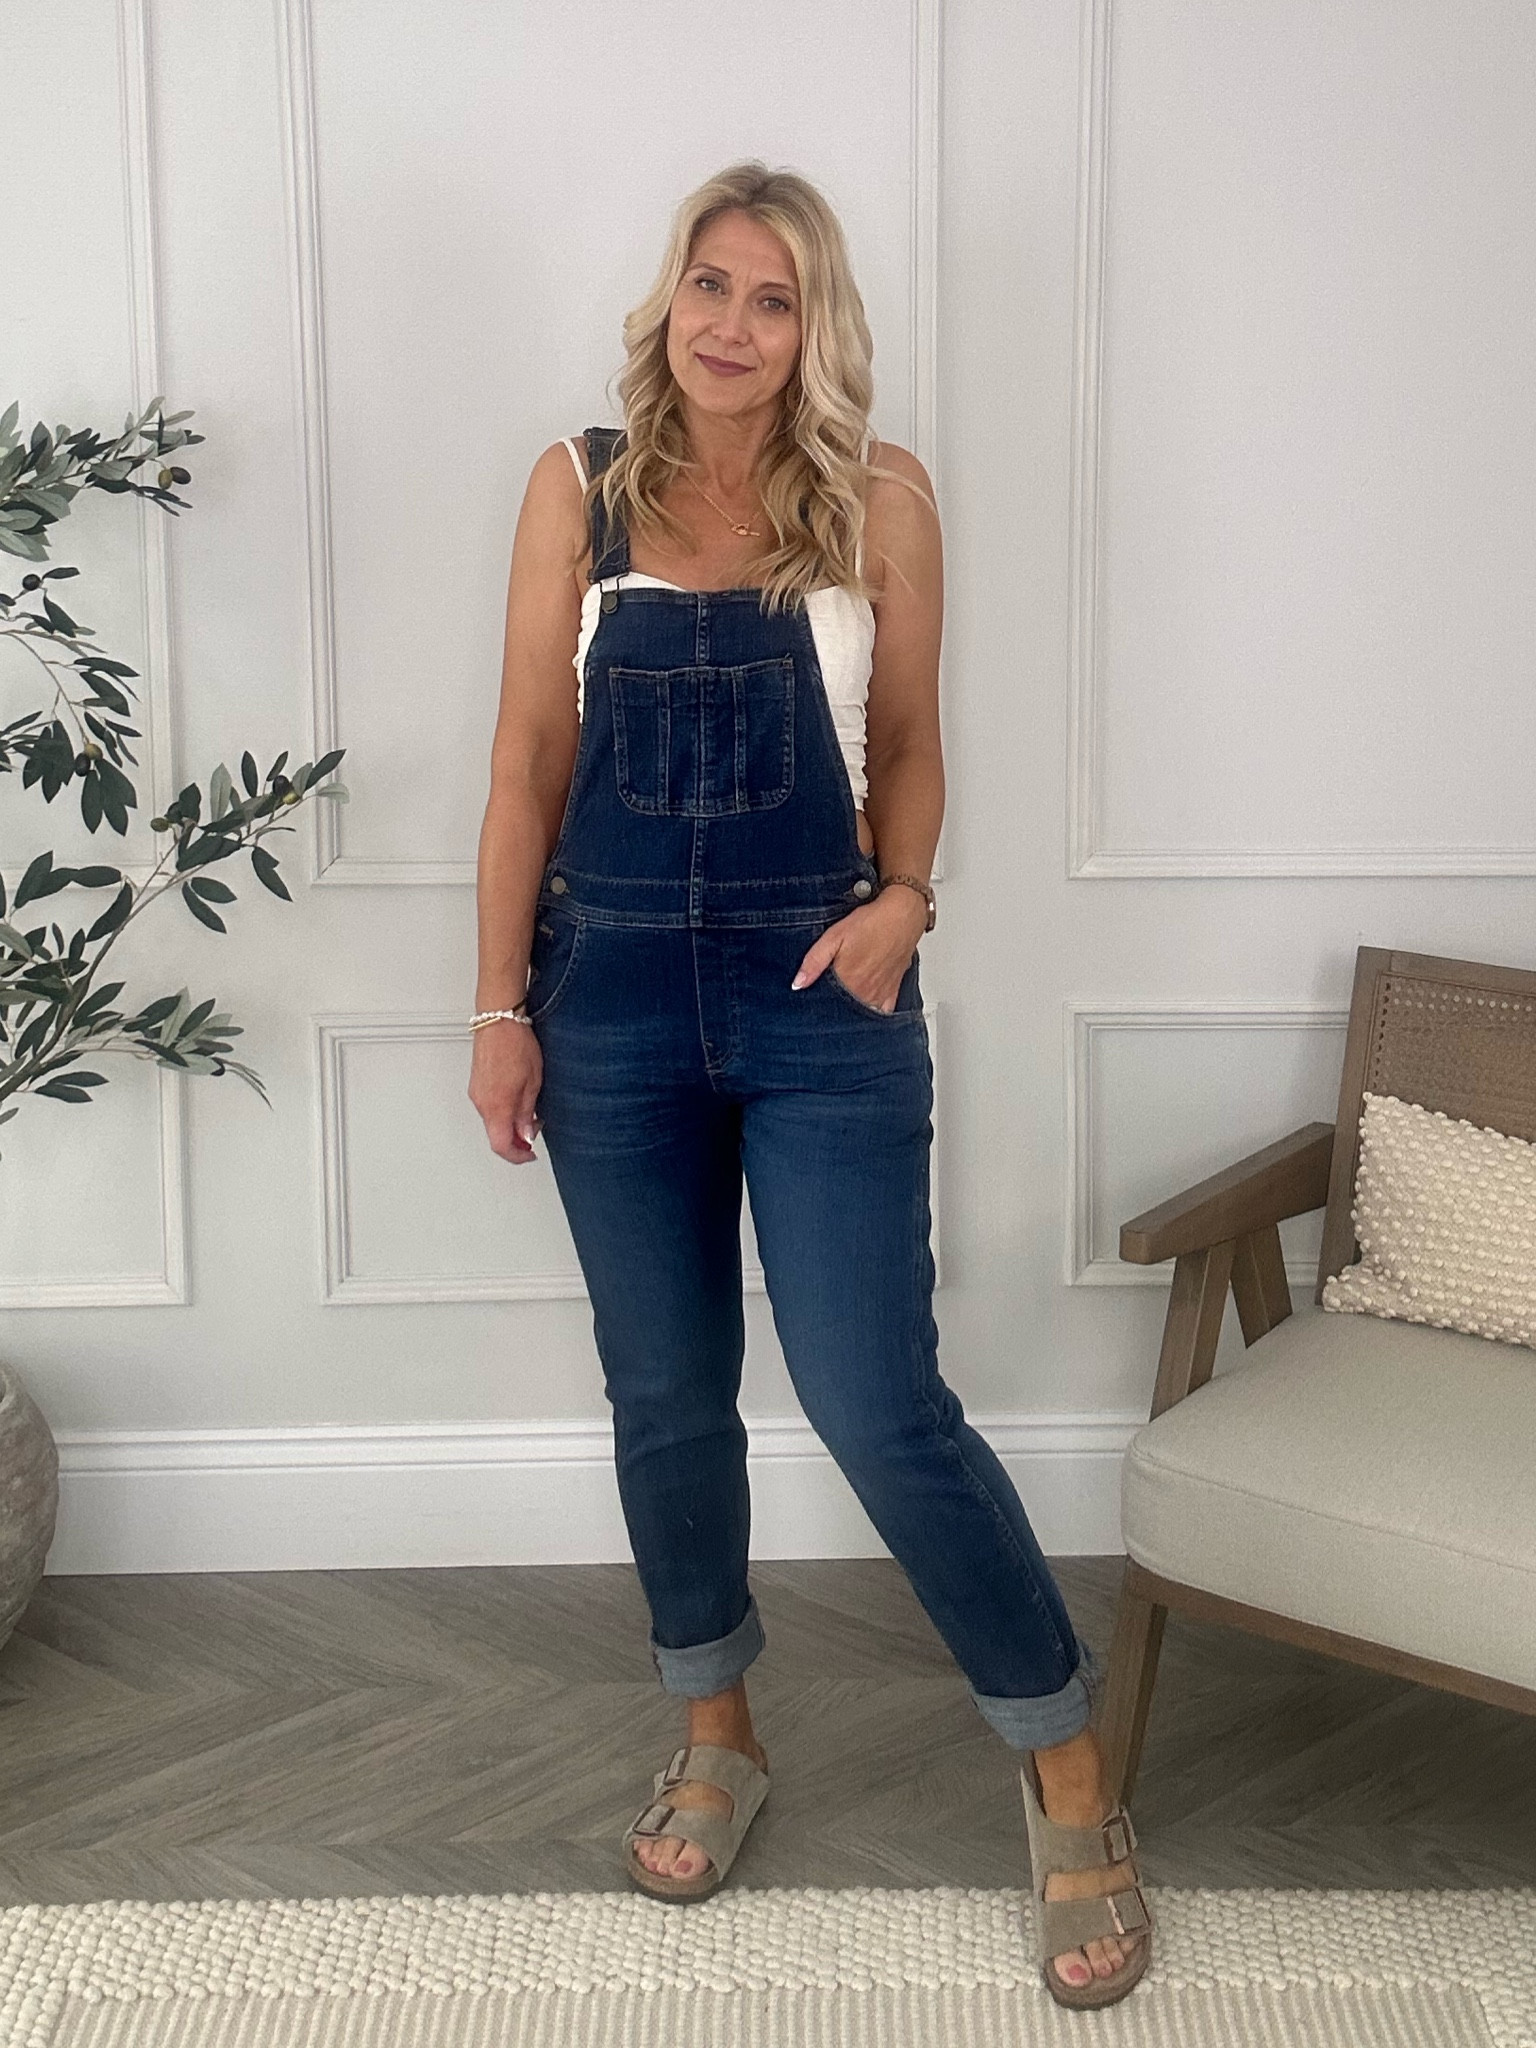 Banbury Dungarees, Jeans & Dungarees